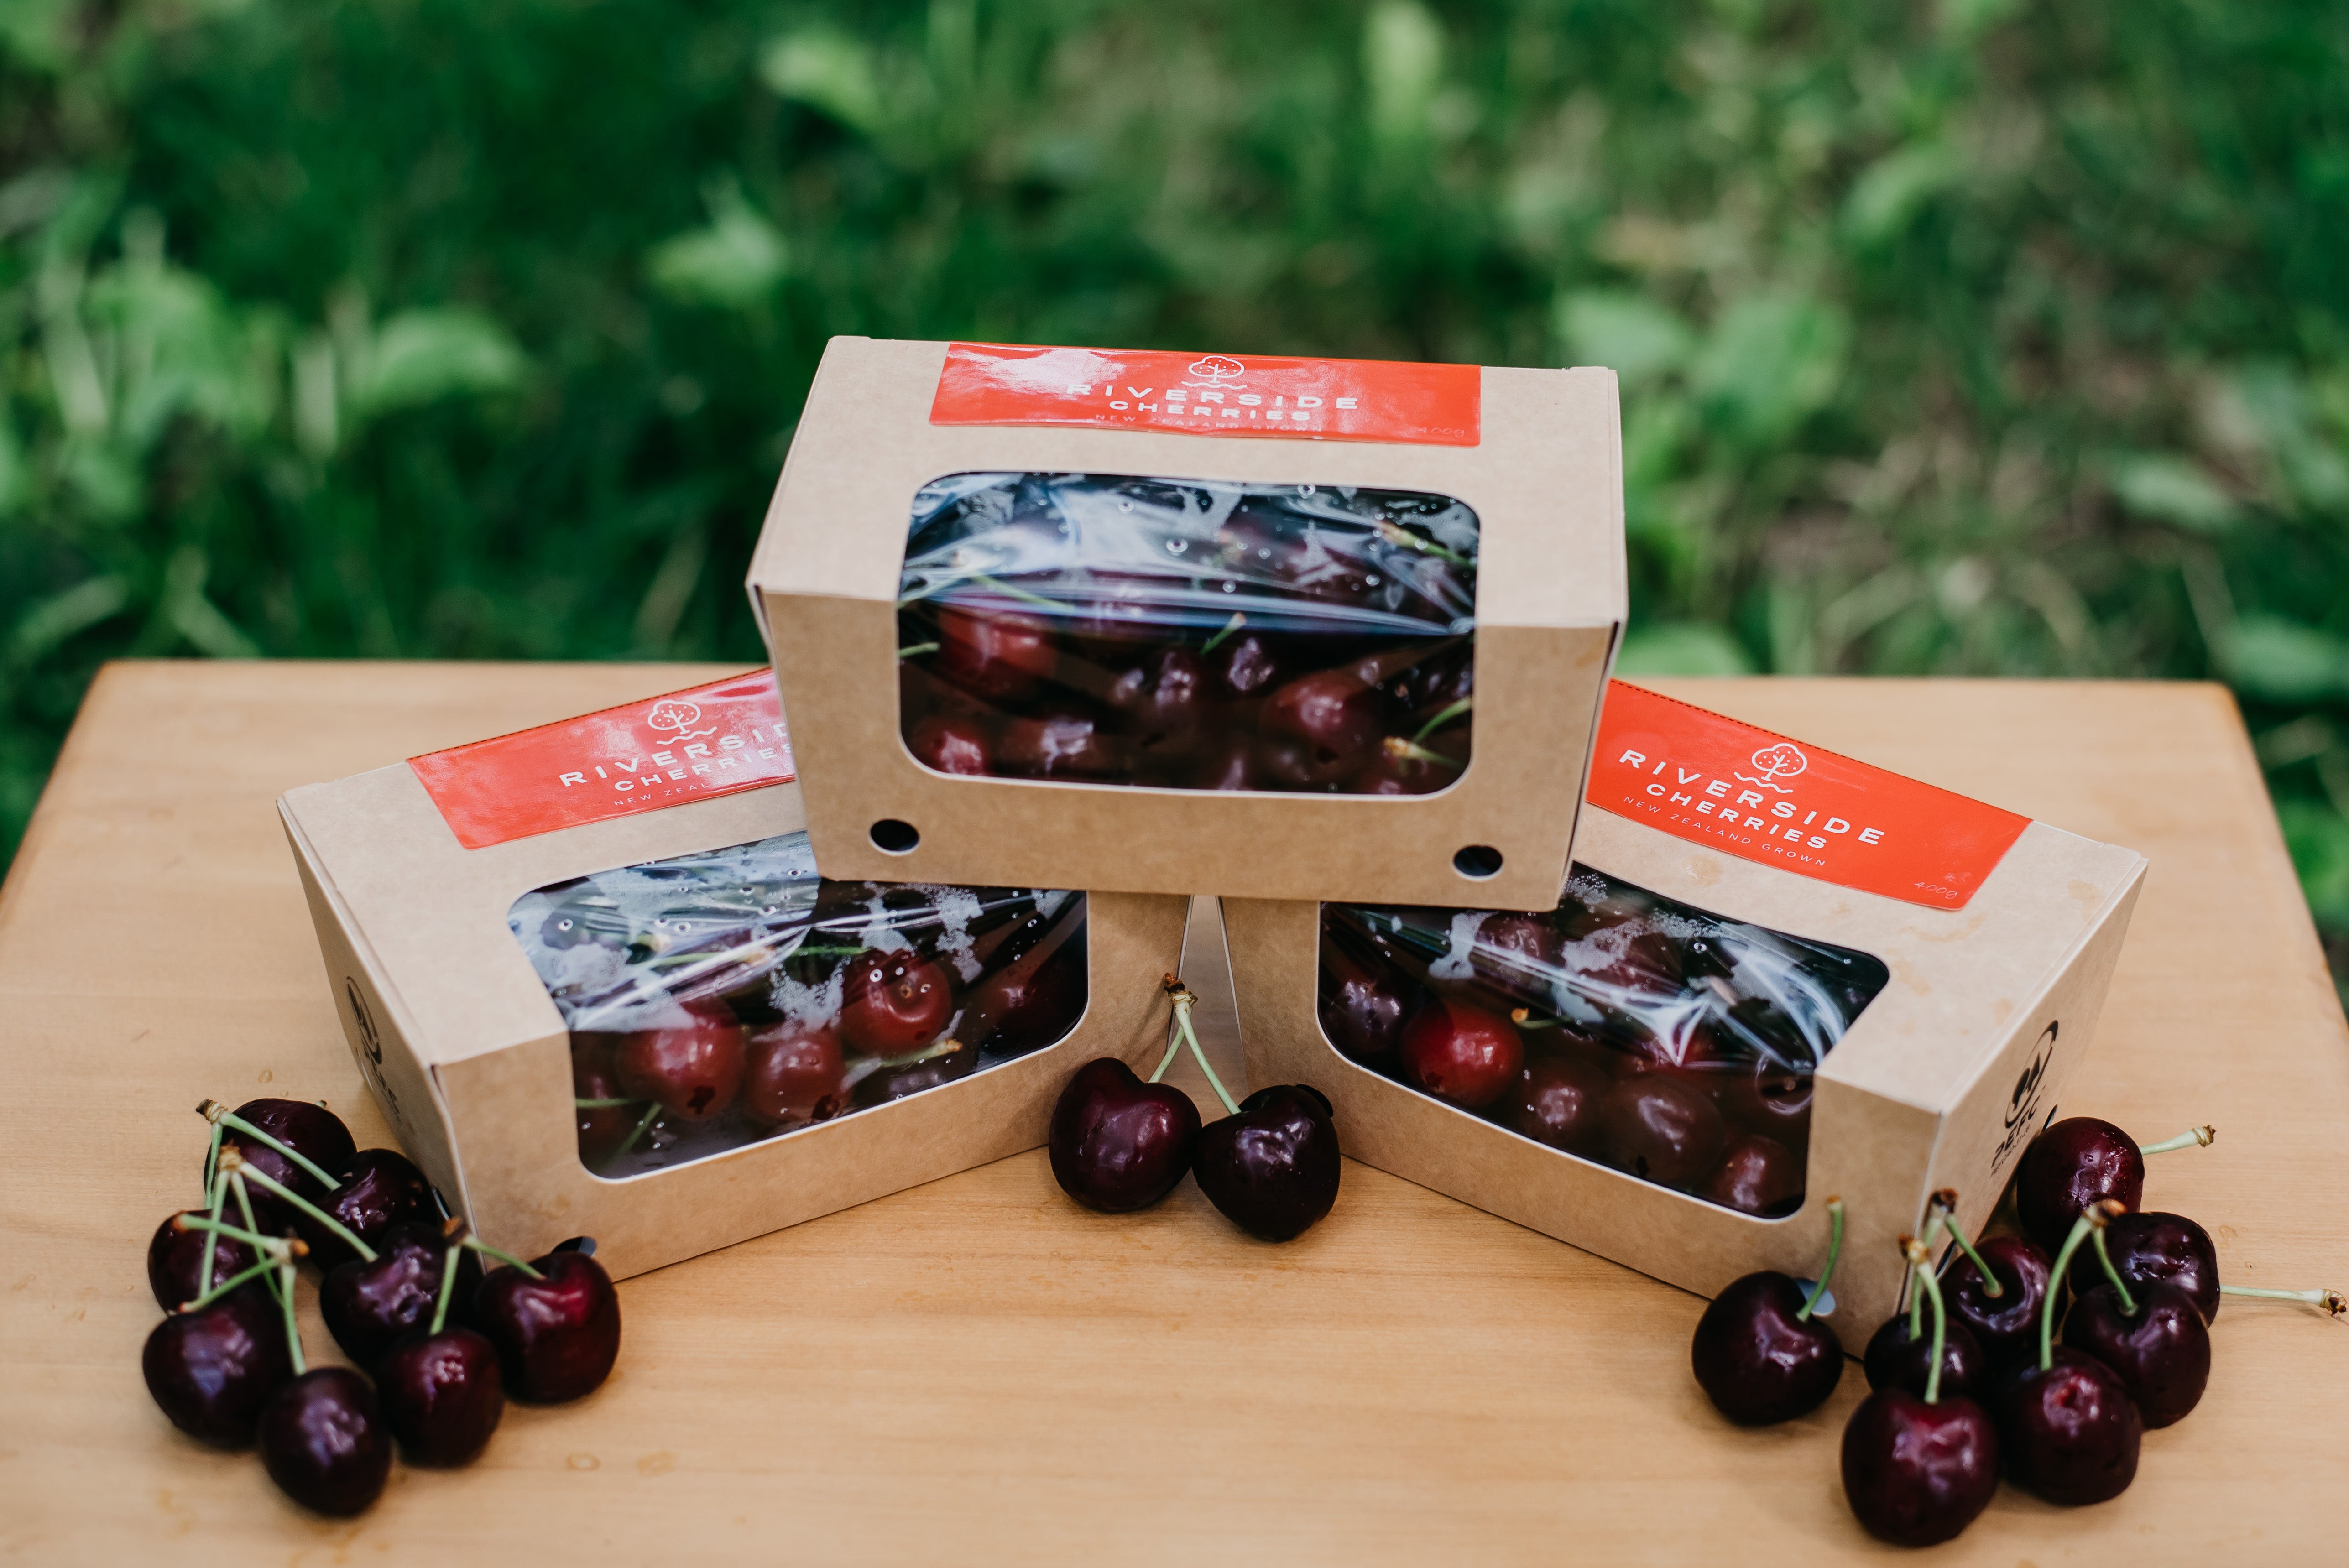 Cherries - Limited edition gift boxes